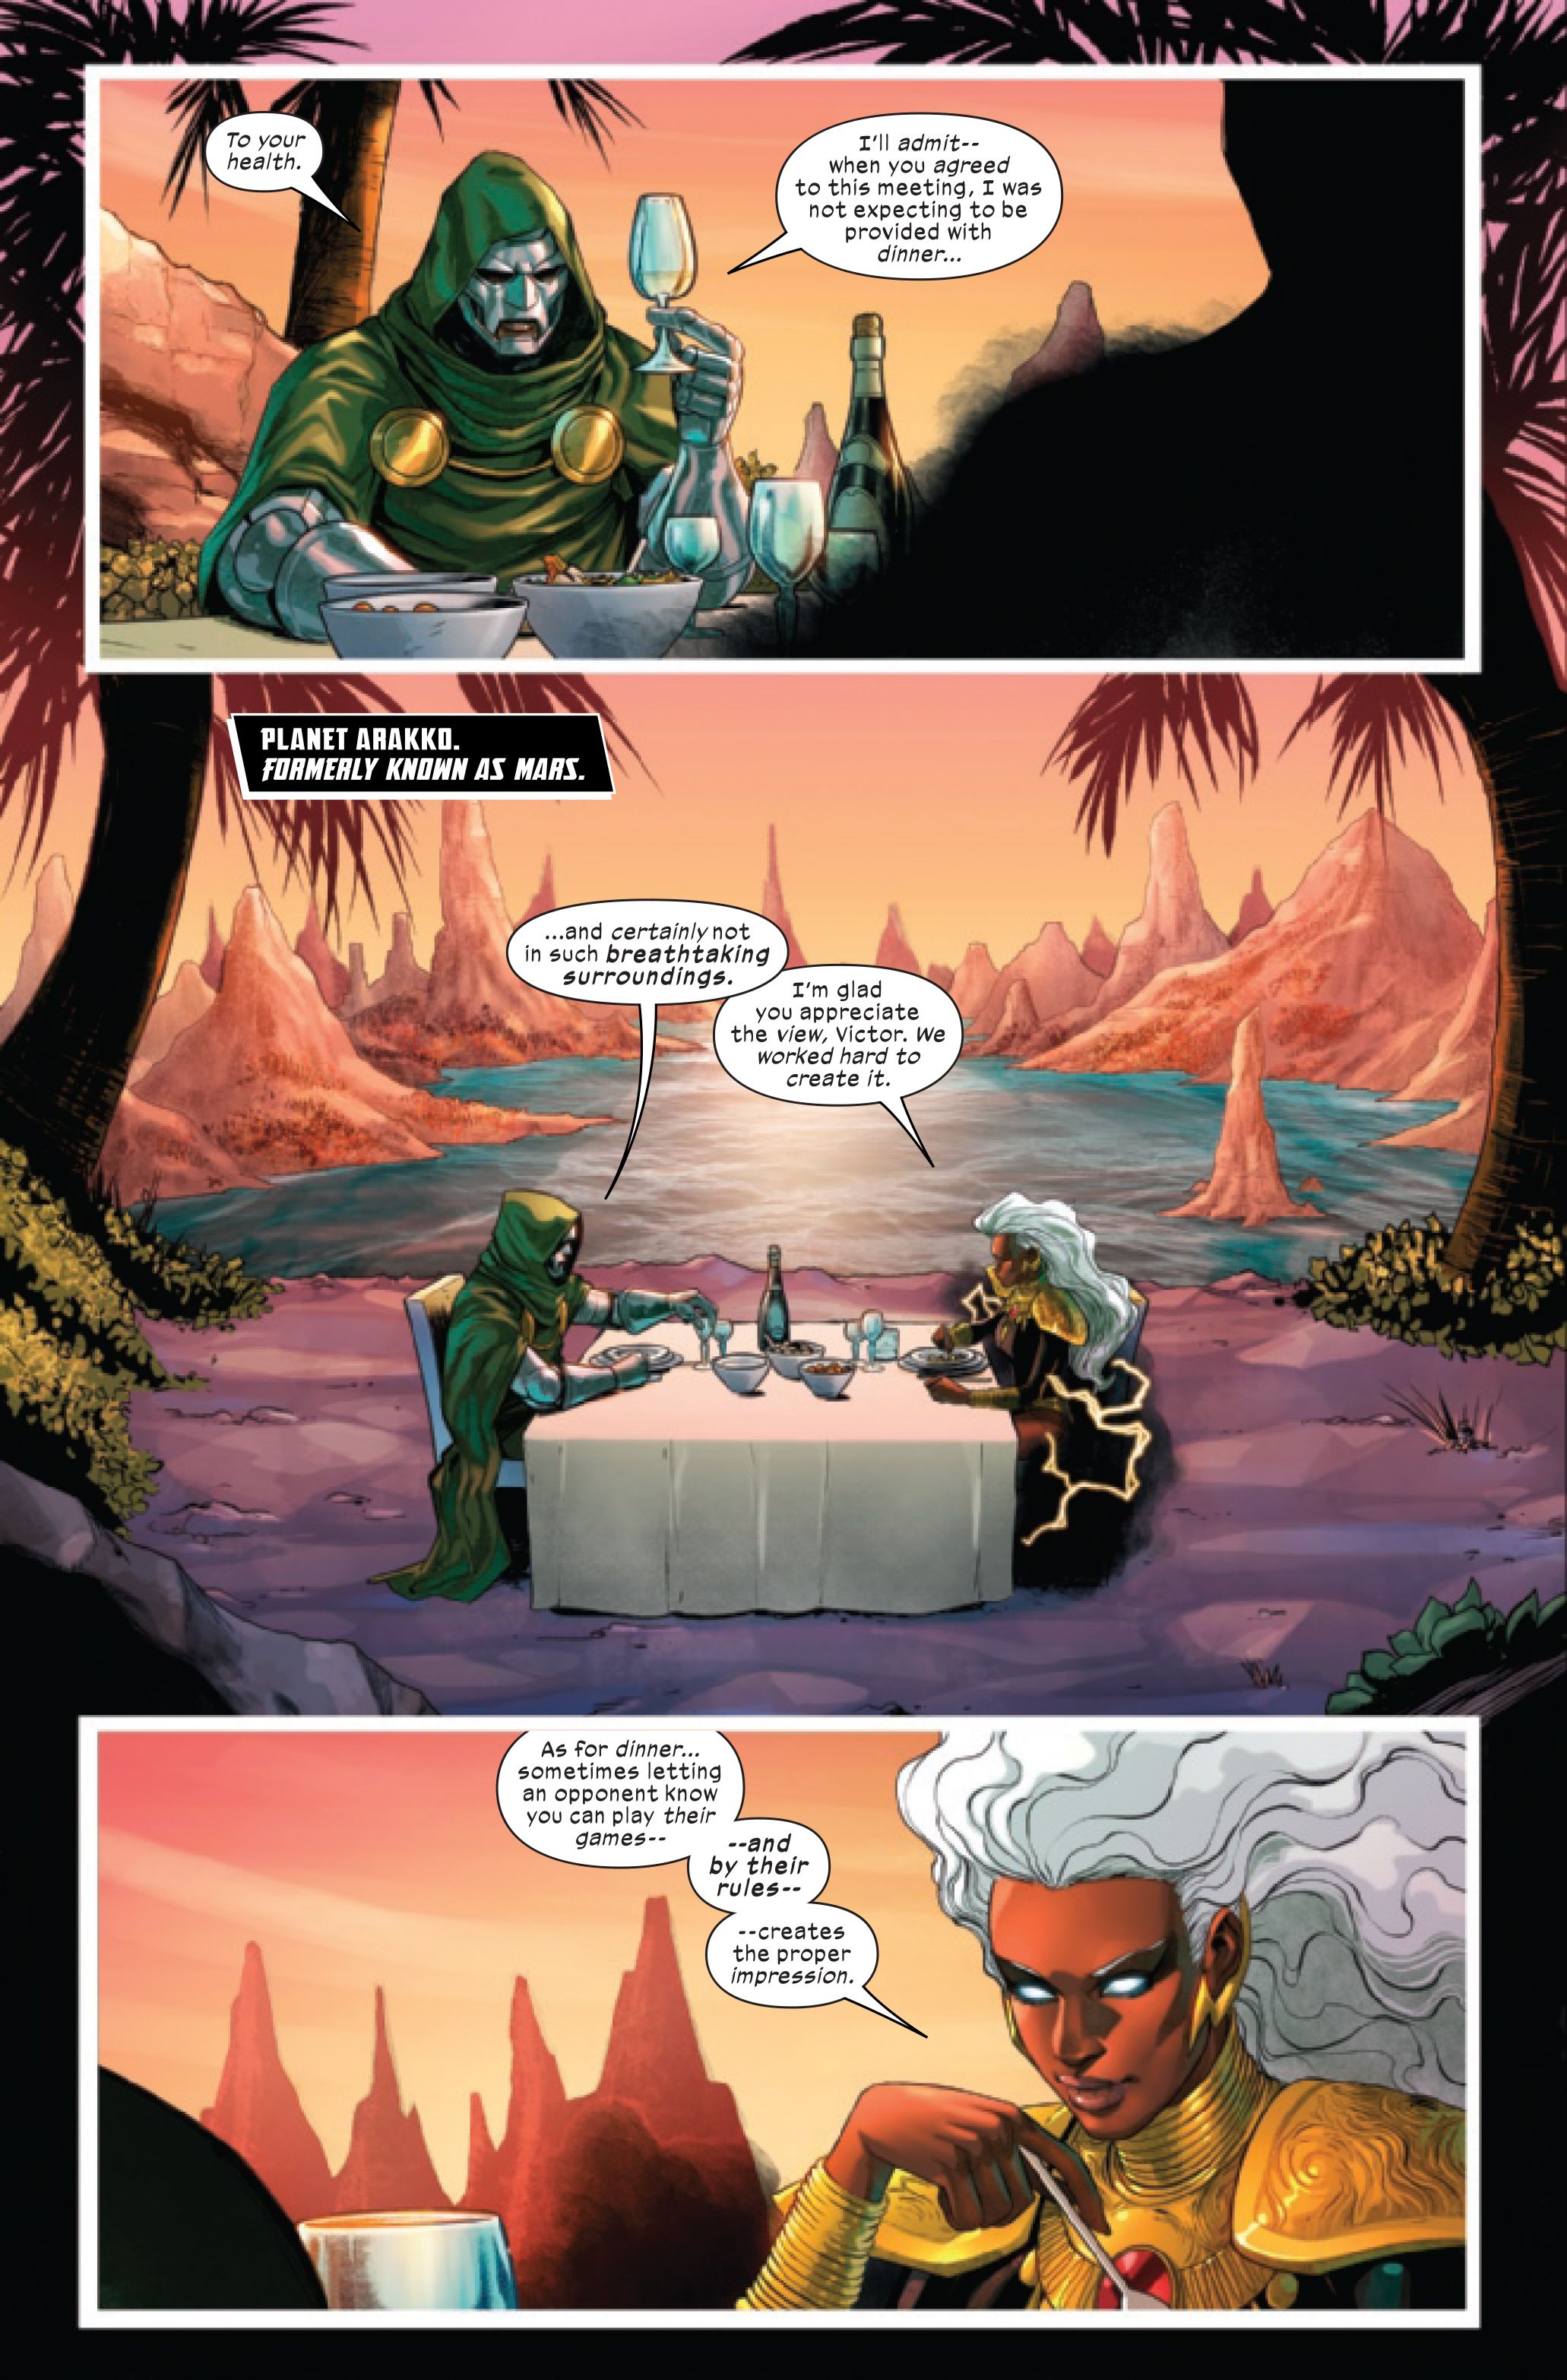 Doctor Droom and Storm talk on the first page of Marvel Comics&#039; S.W.O.R.D. #7, by Al Ewing and Stefano Caselli.